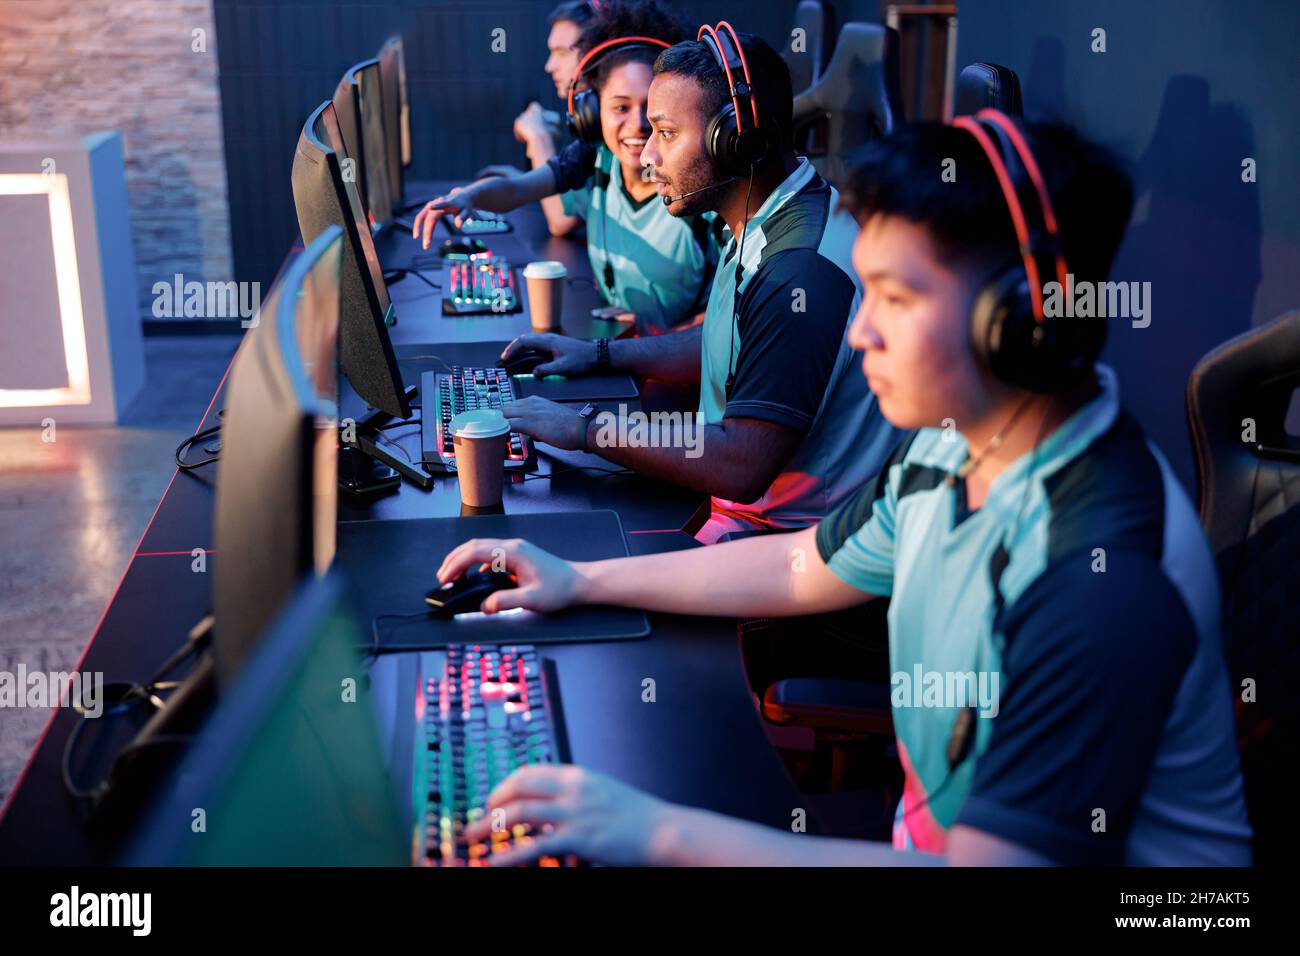 Cybersport team involved in online tournament in gaming club Stock Photo